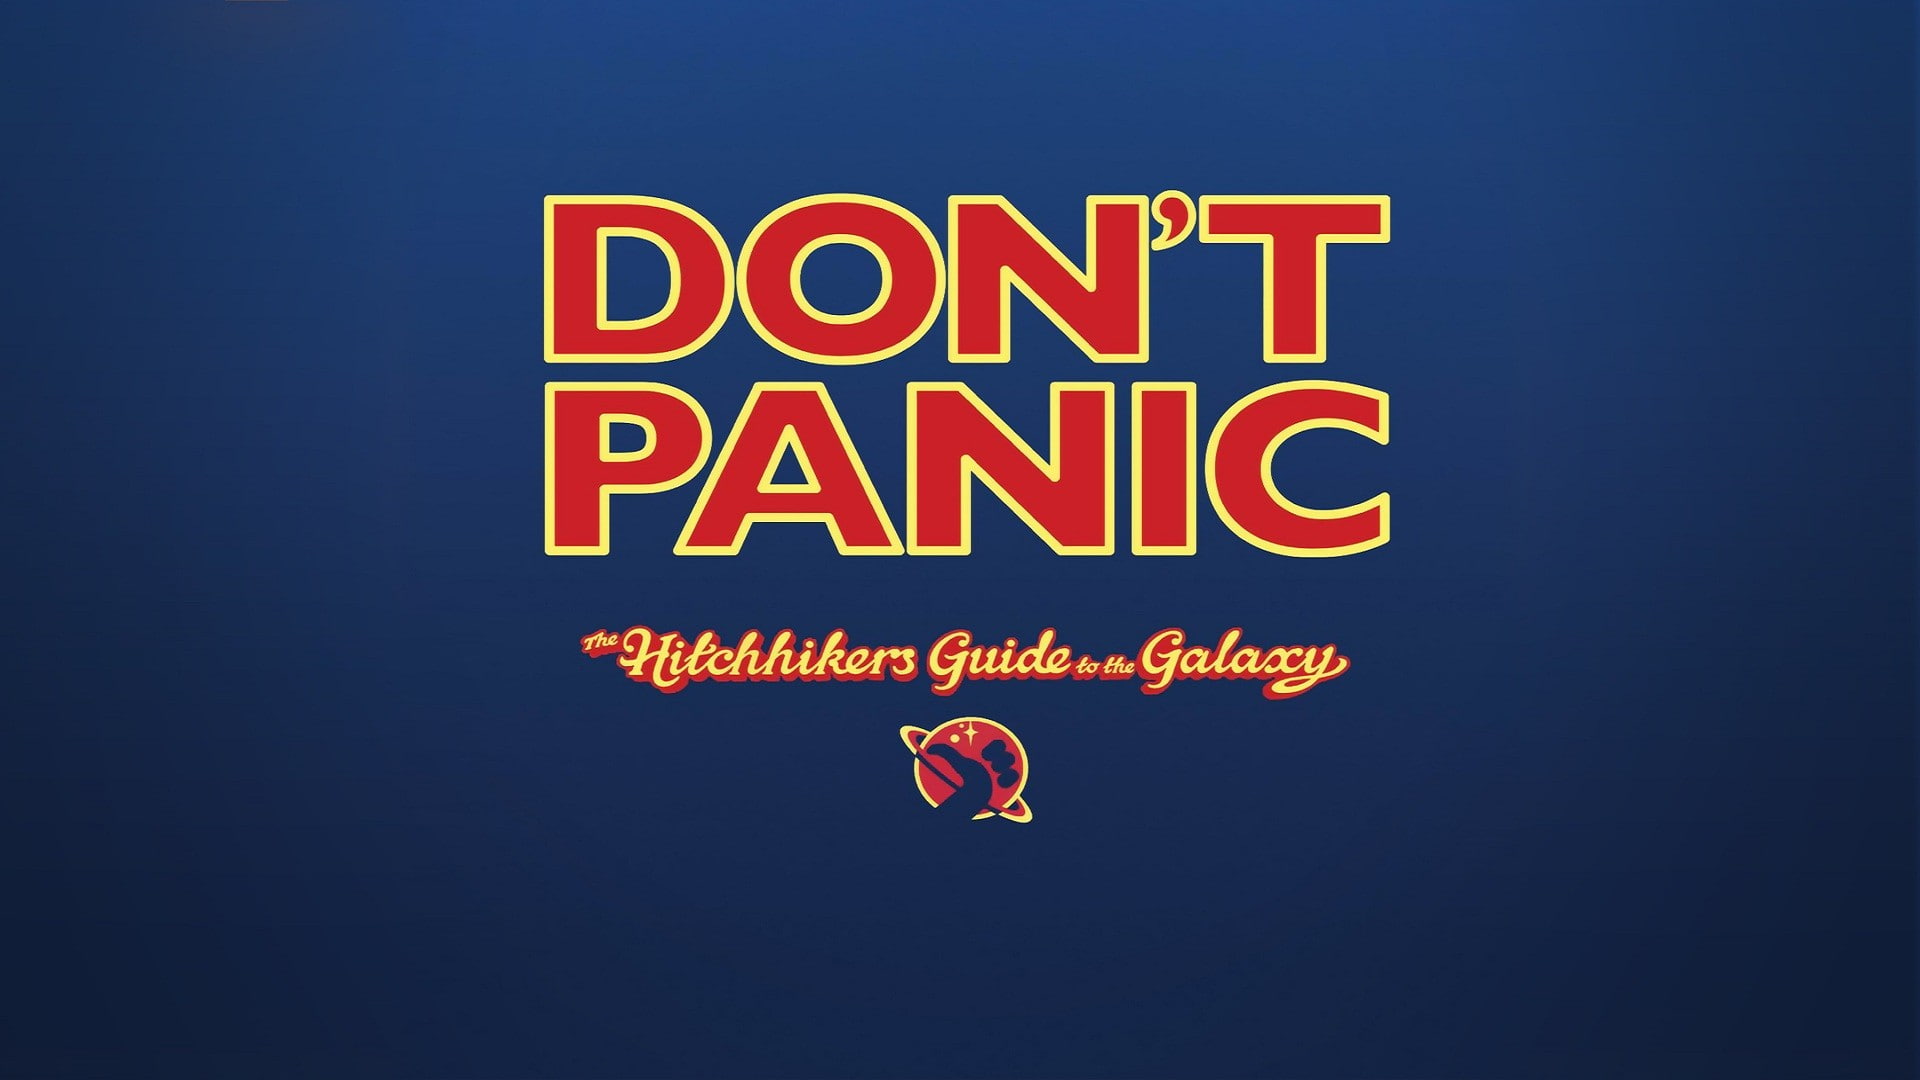 The Hitchhiker's Guide to the Galaxy, typography, blue background